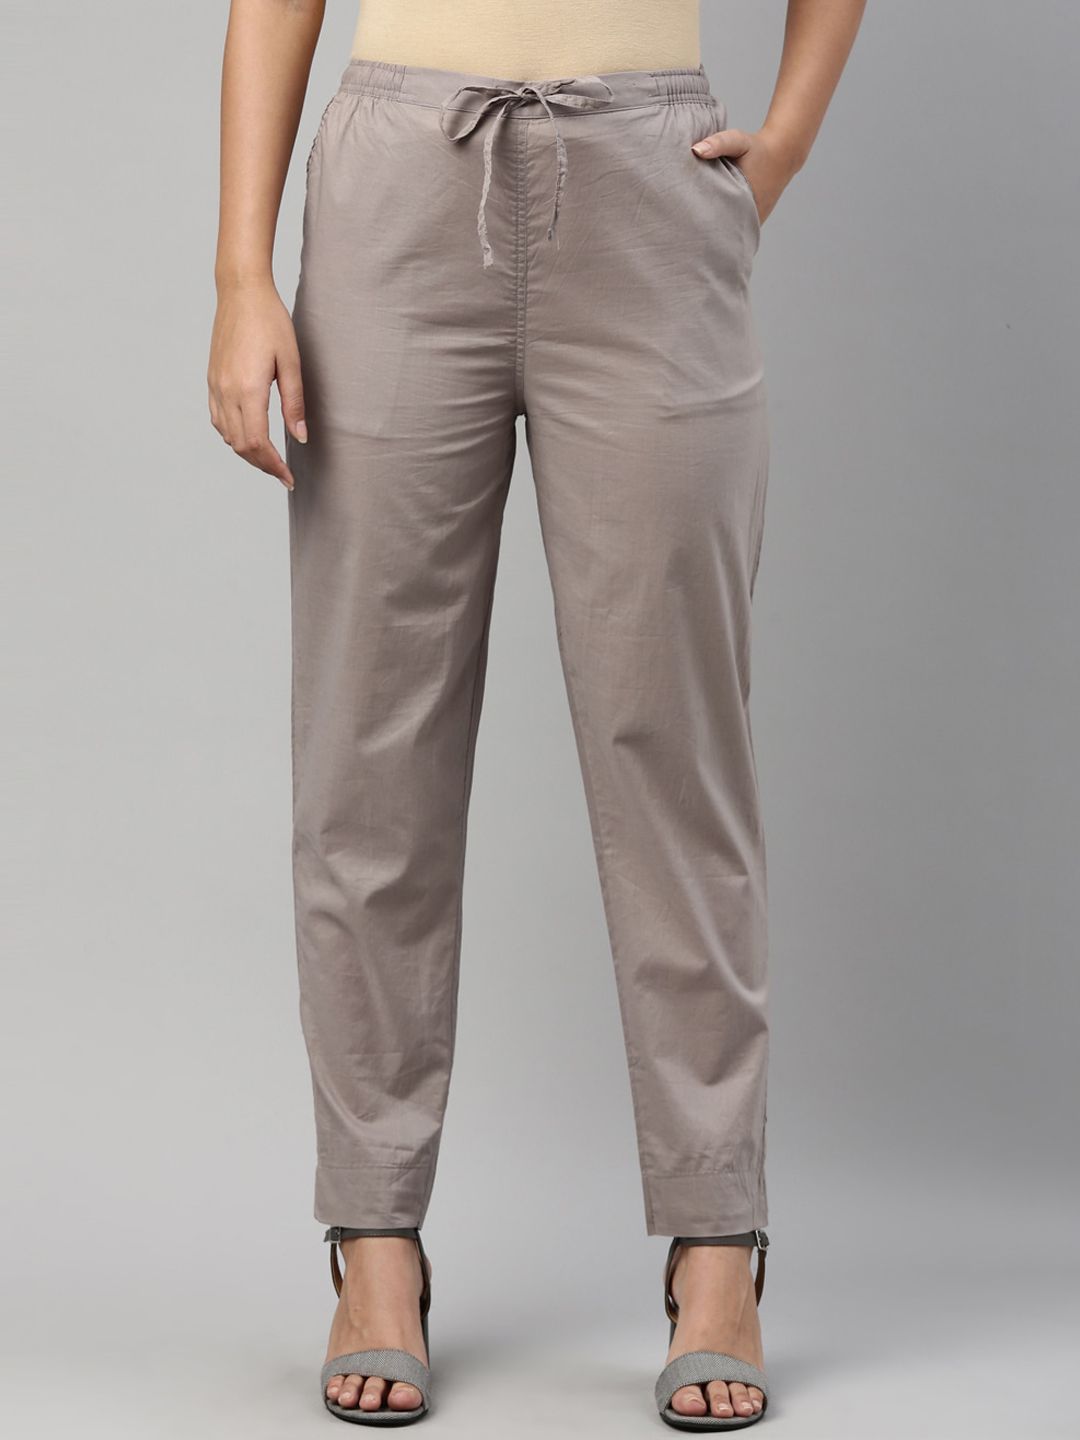 Go Colors Women Grey Cotton Trousers Price in India